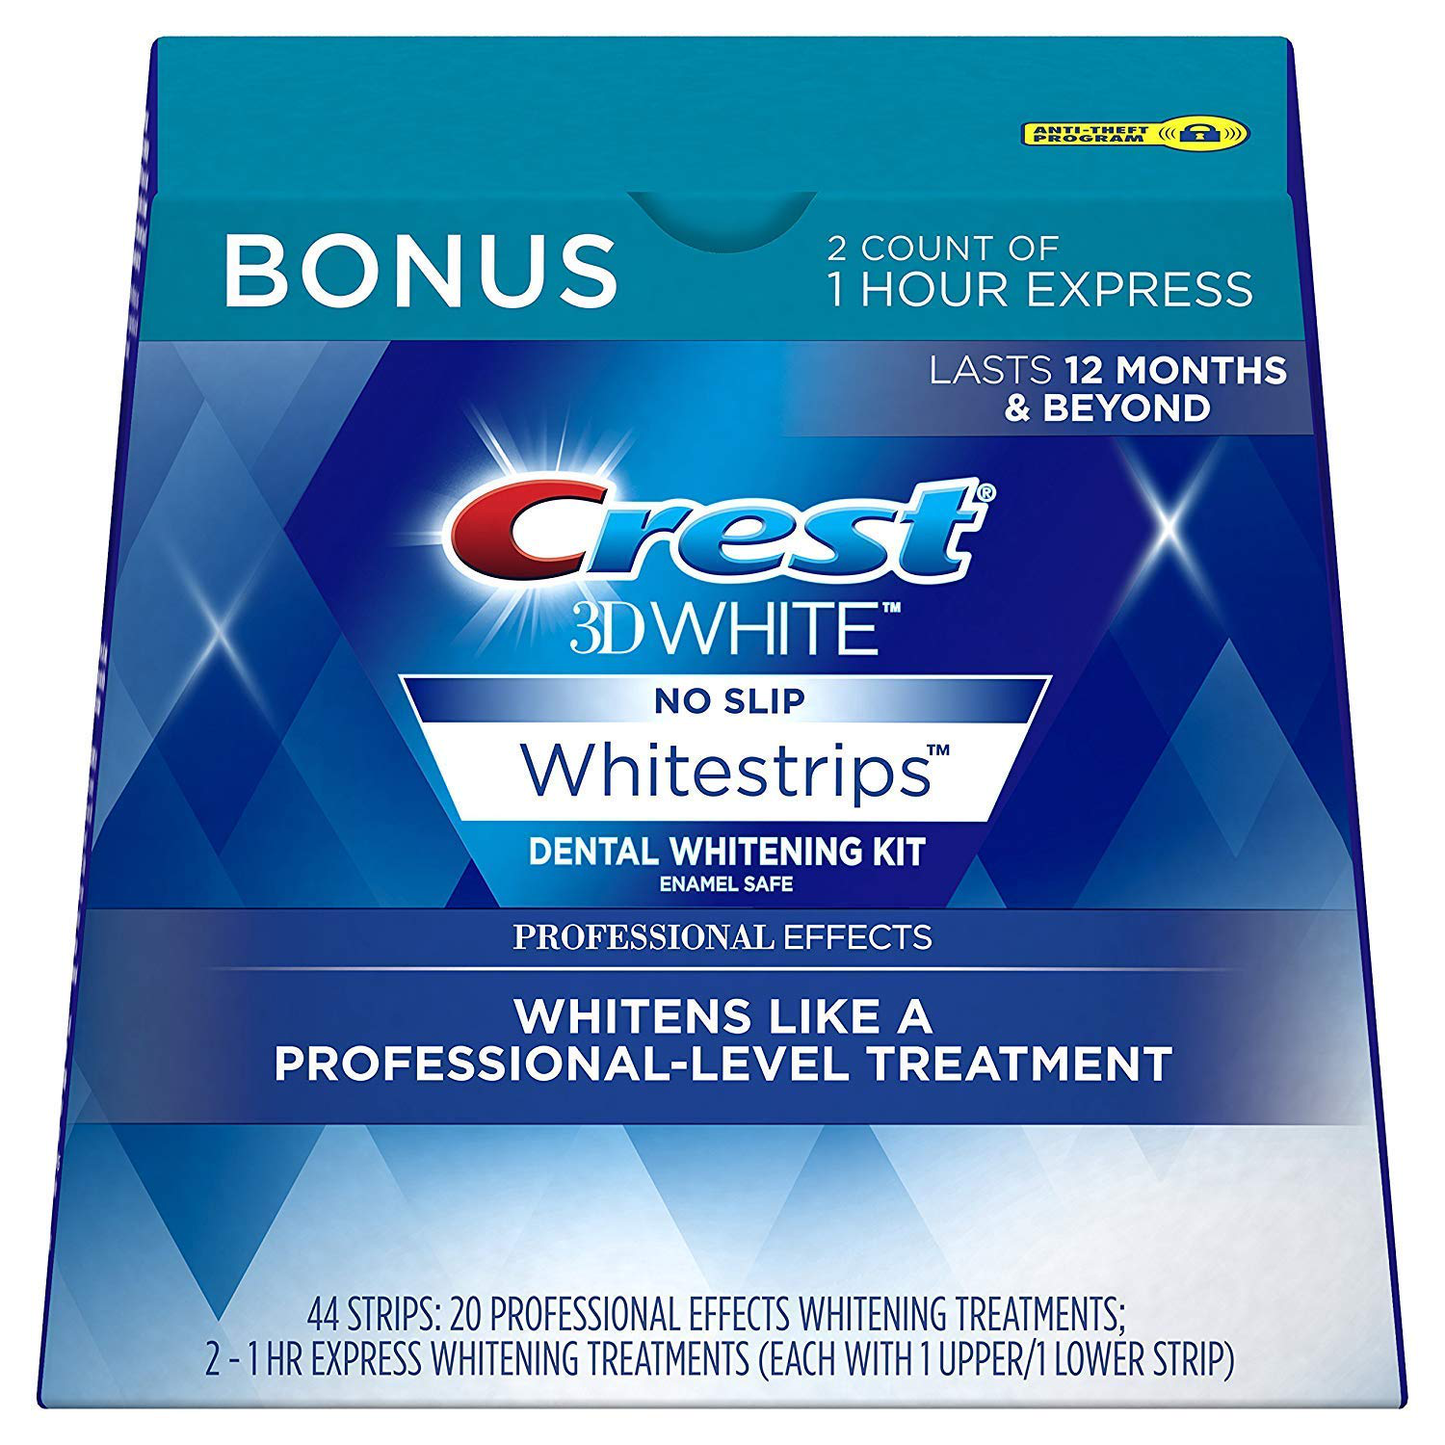 Crest 3D White Professional Effects Whitestrips 20 Treatments + Crest 3D White 1 Hour Express Whitestrips 2 Treatments - Teeth Whitening Kit